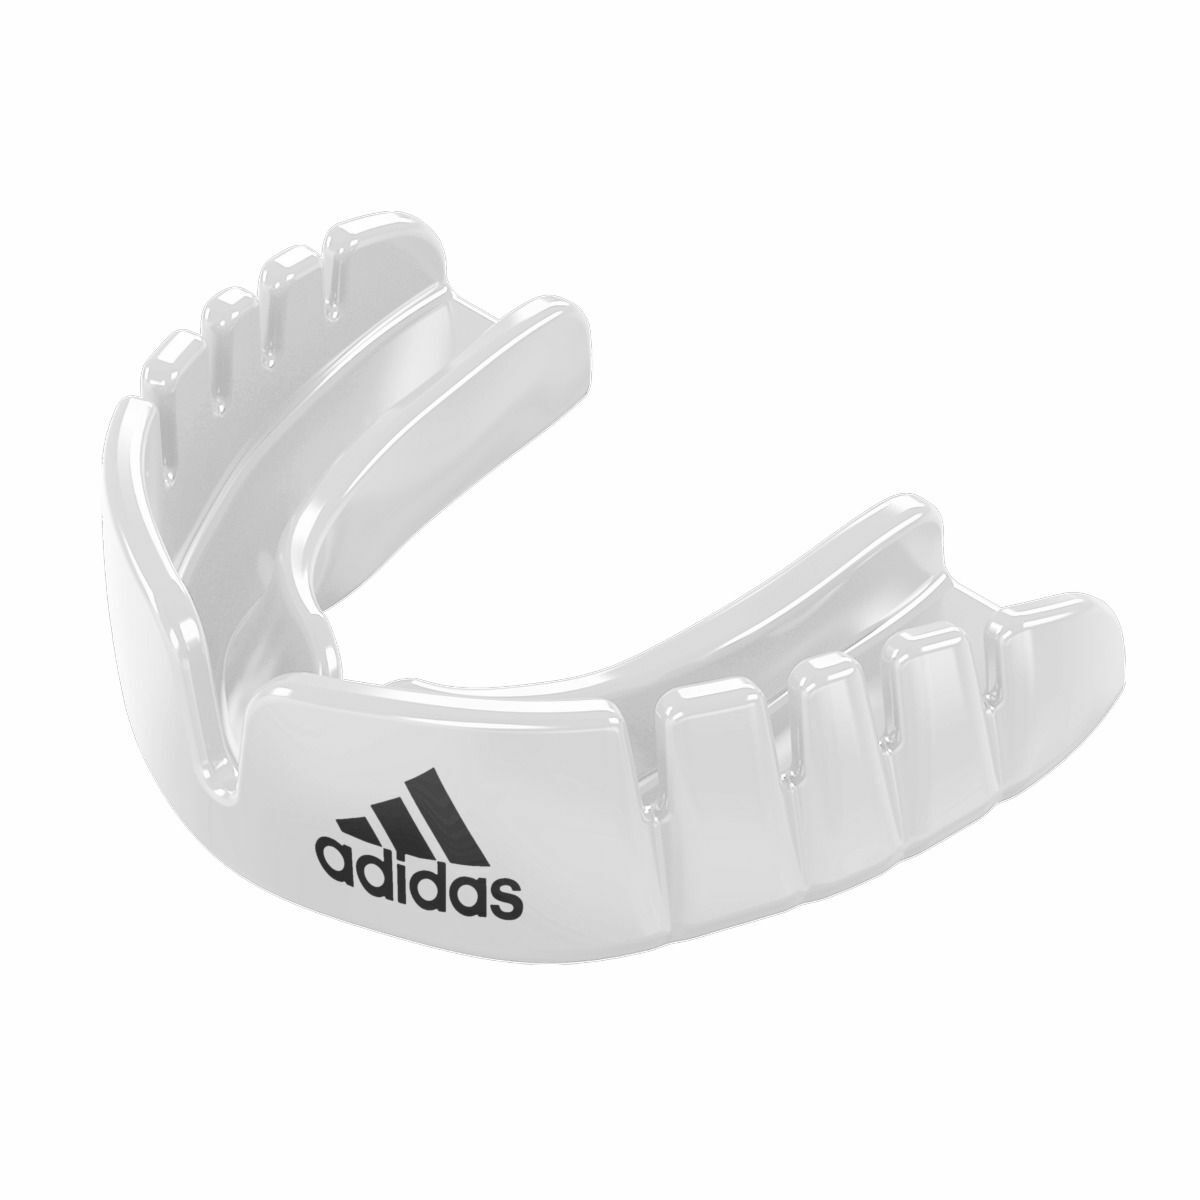 Adidas OPRO Snap-fit Gen4 Boxing Martial Arts Mouth Guard Adults Kids - Hamtons Direct